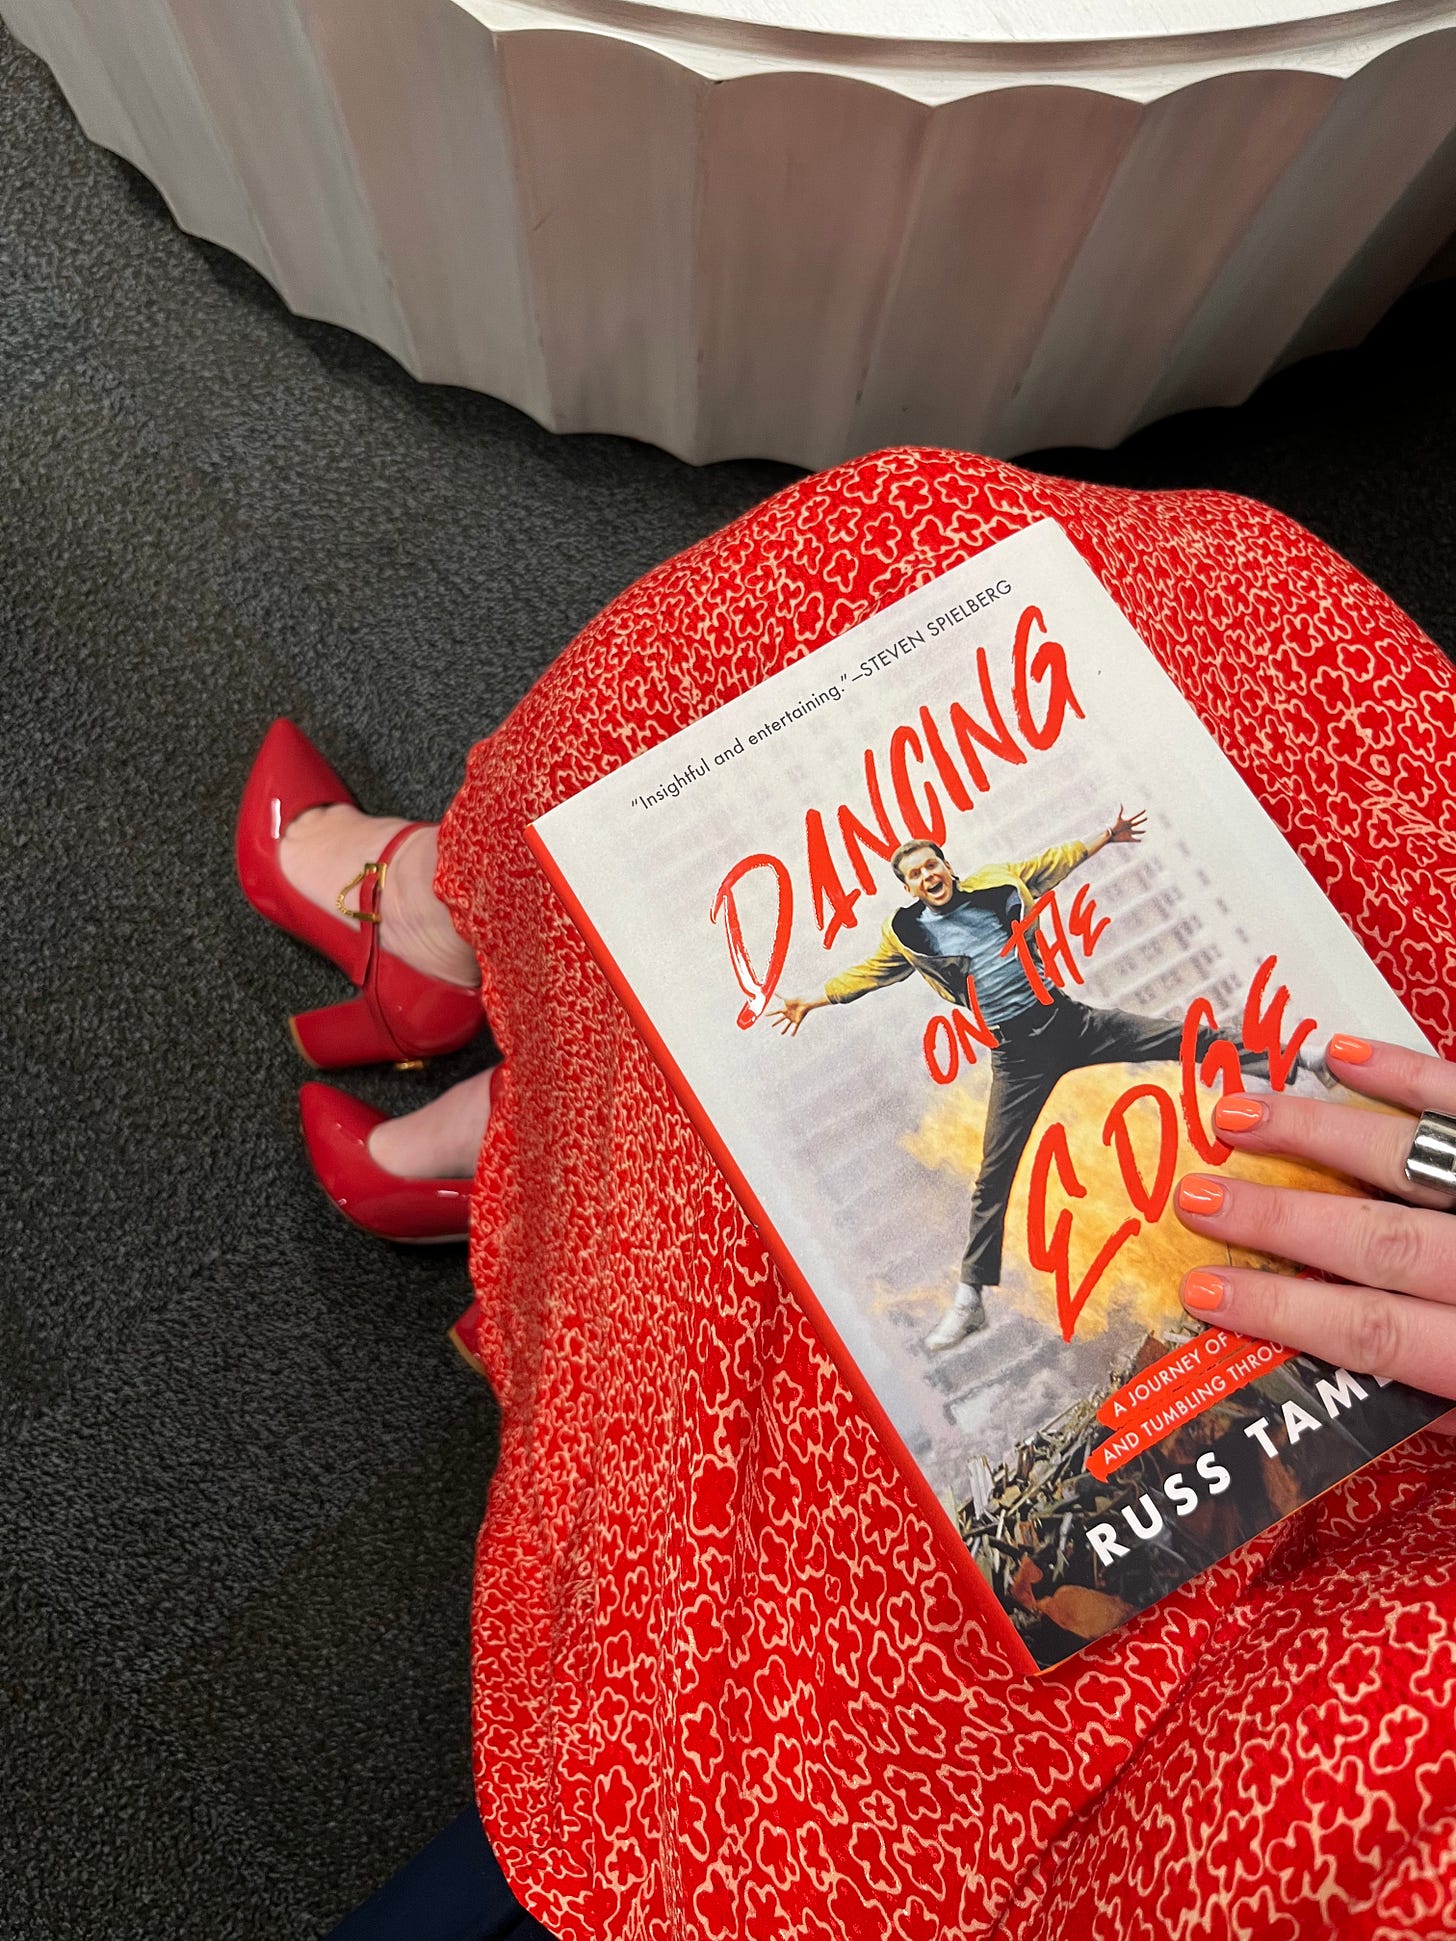 A photo of the book resting on Amber's lap. She wears a red-orange dress with matching shoes and orange nail polish which all color coordinate with the font color on the book cover.